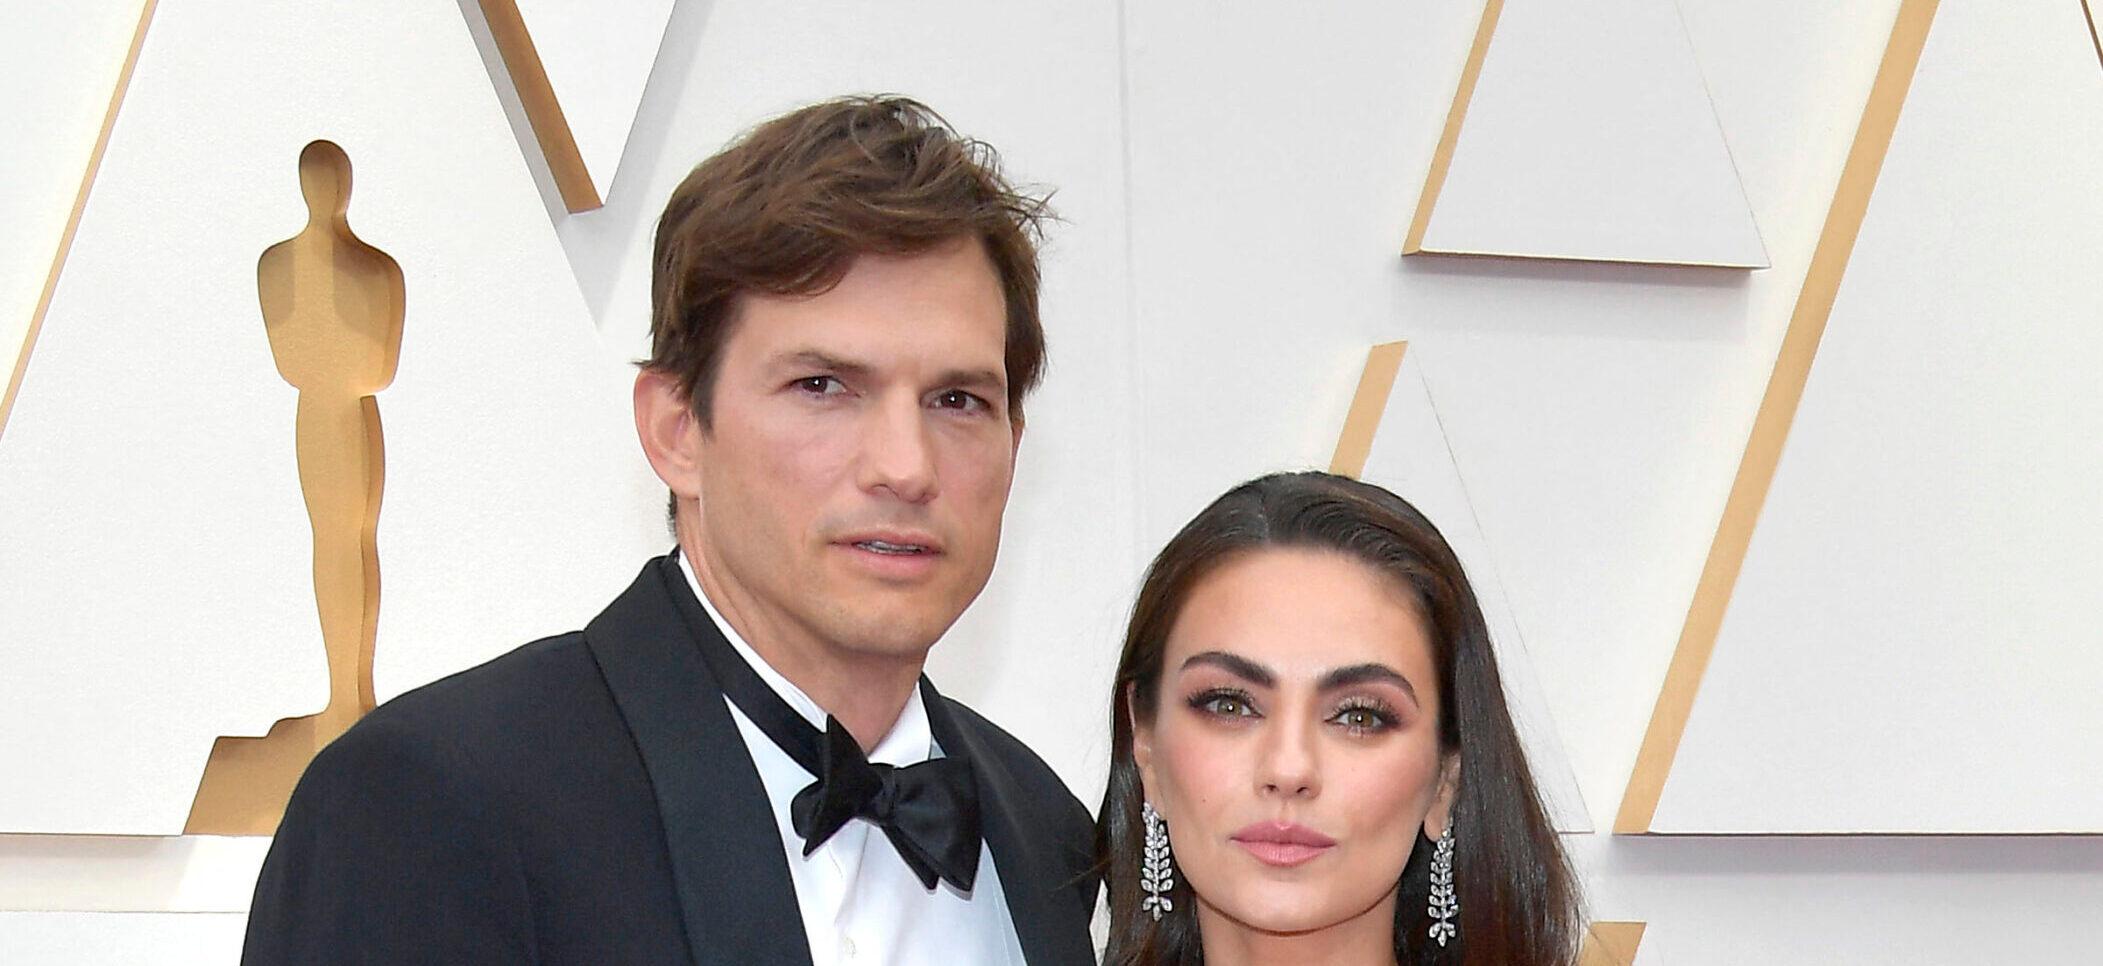 Fans Are Outraged Over Ashton Kutcher & Mila Kunis’ Danny Masterson Apology Video